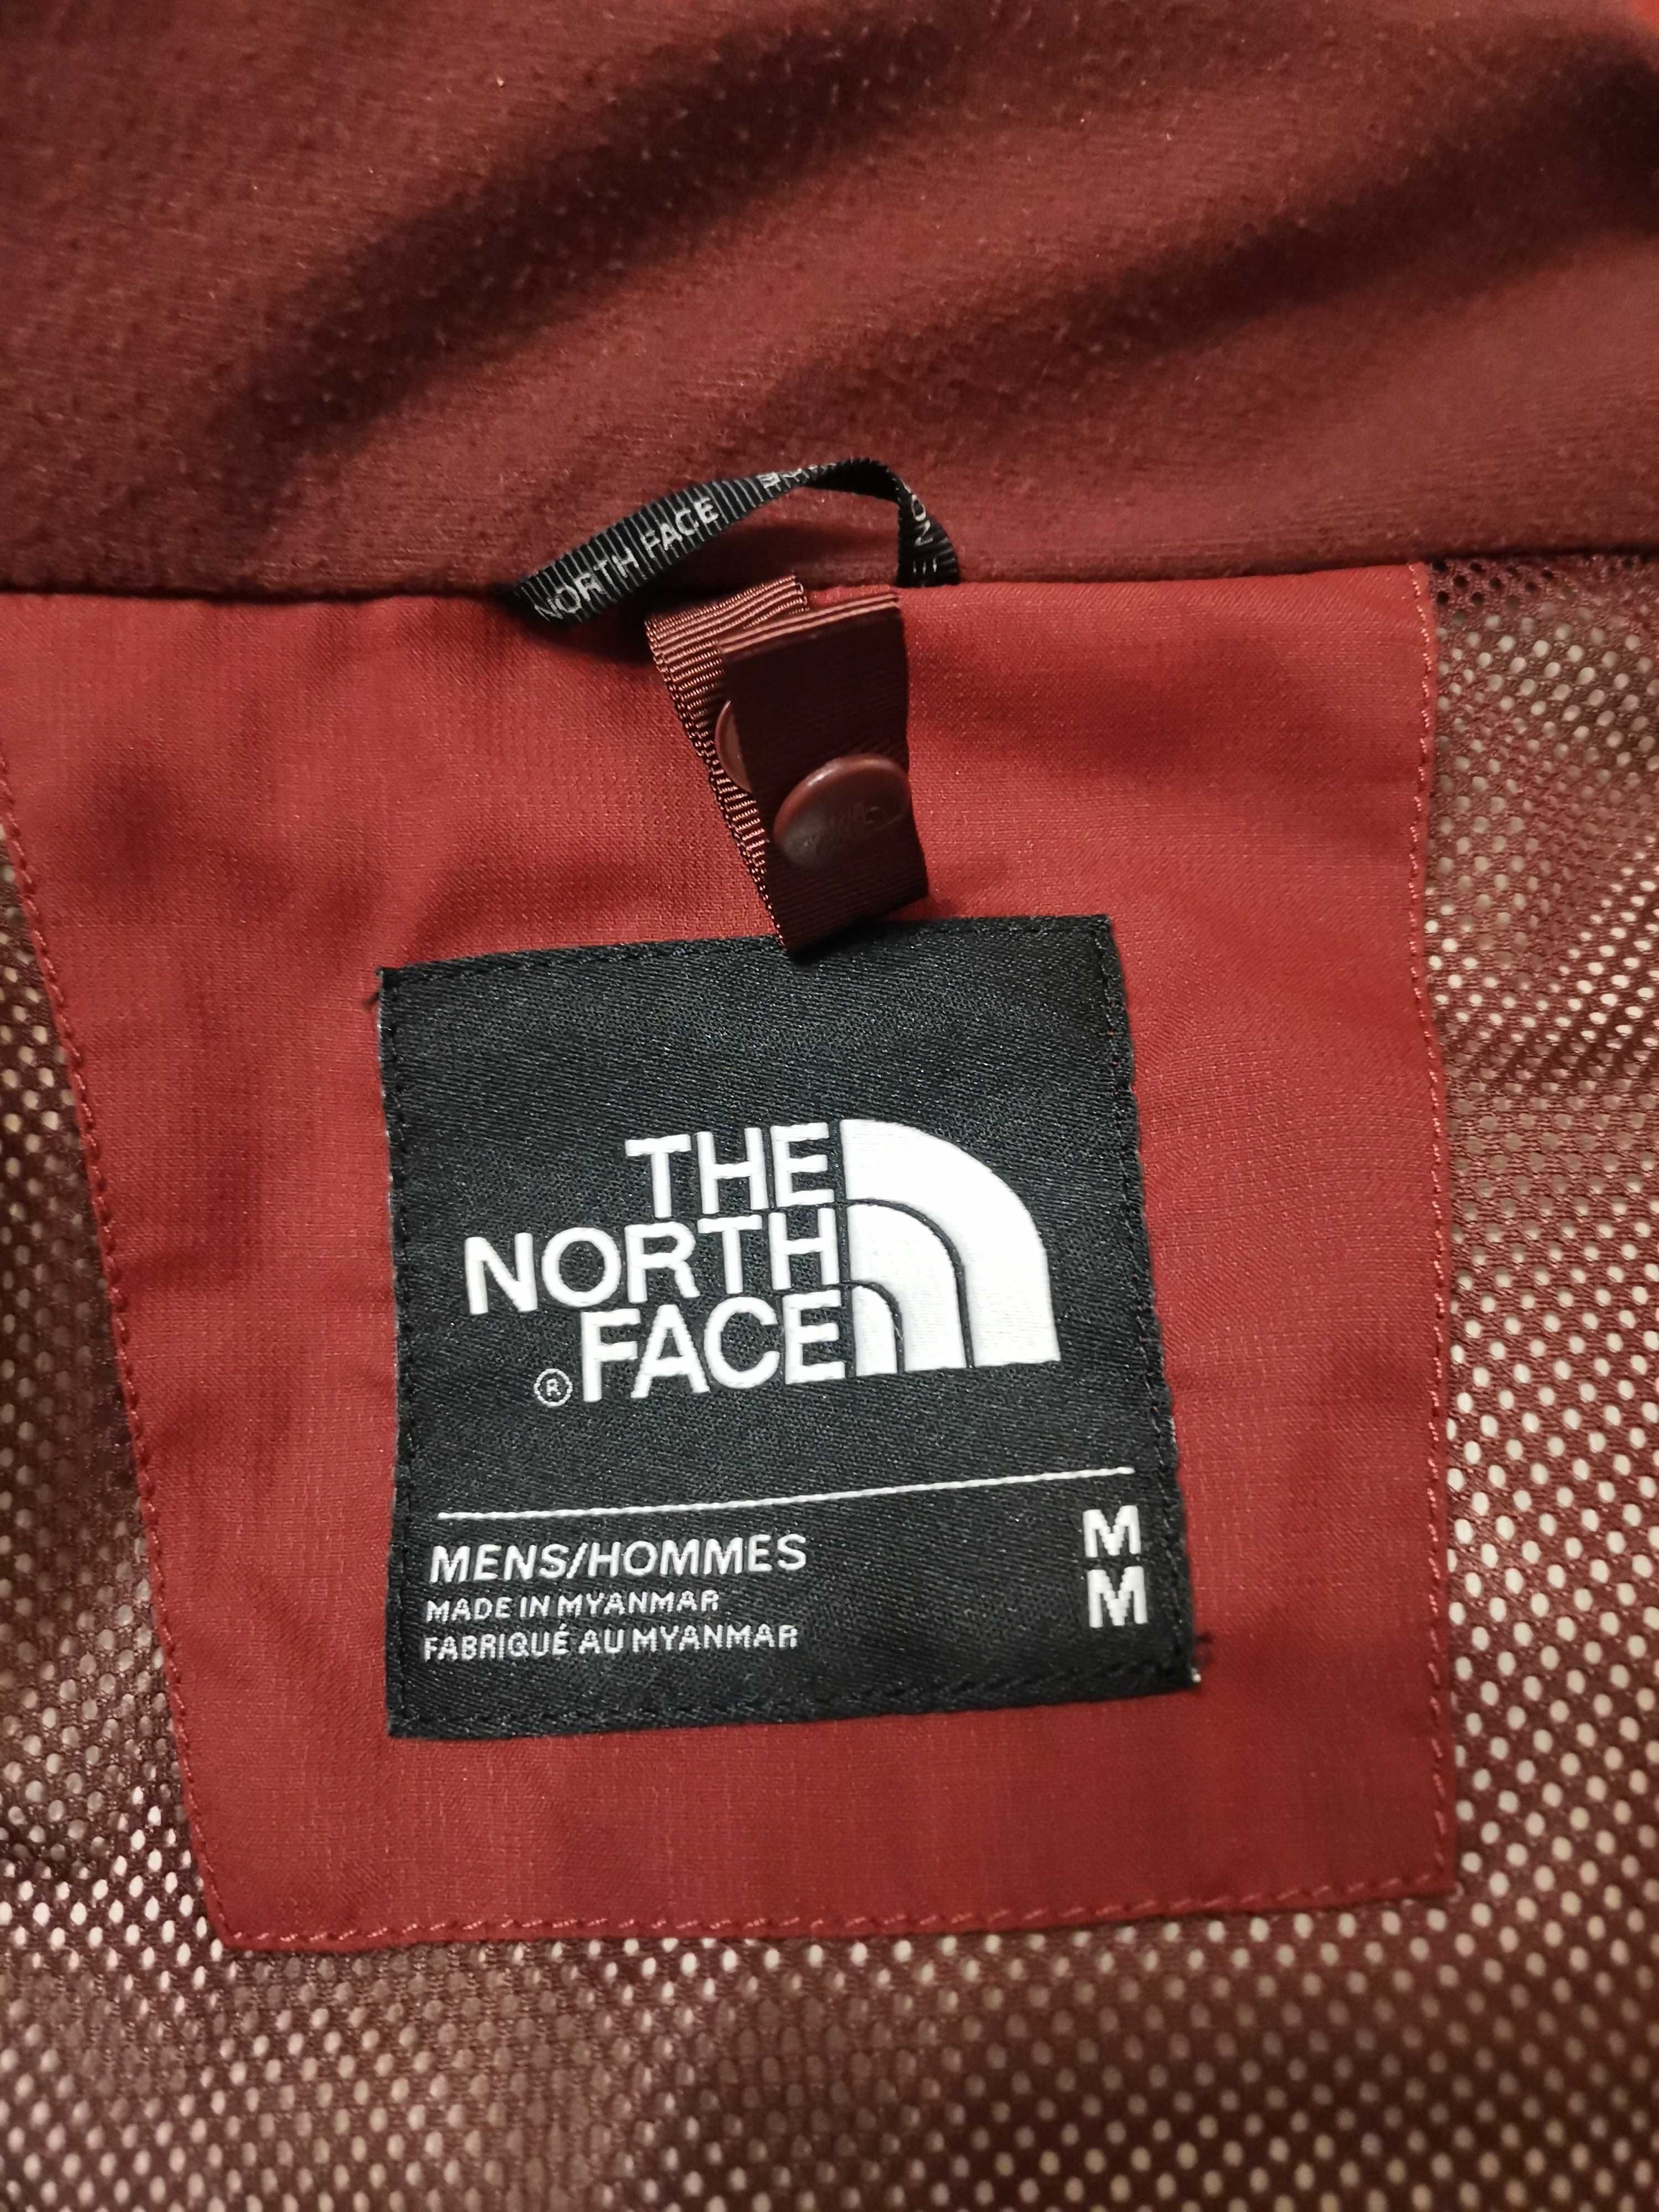 THE NORTH FACE- Evolve II Triclimate Jacket - 3-in-1 Jacket.